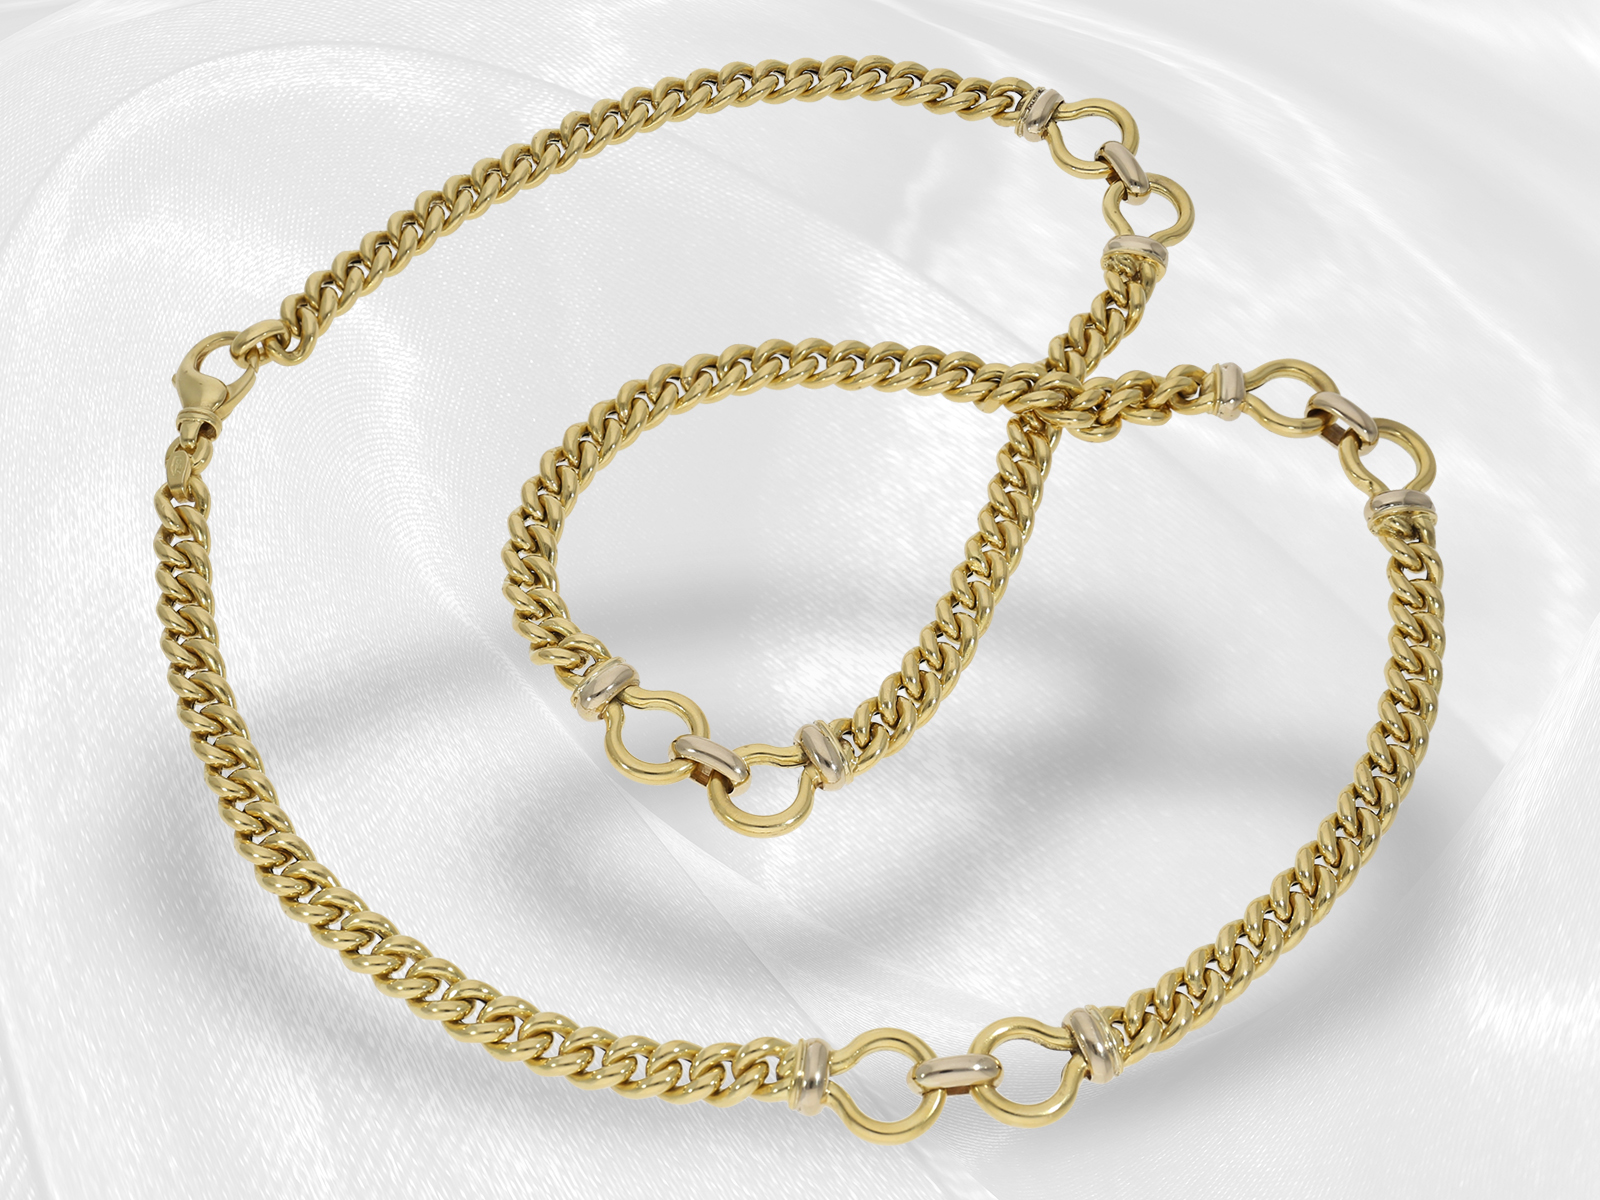 Chain/Collier: luxury long designer gold necklace, 18K gold - Image 6 of 7